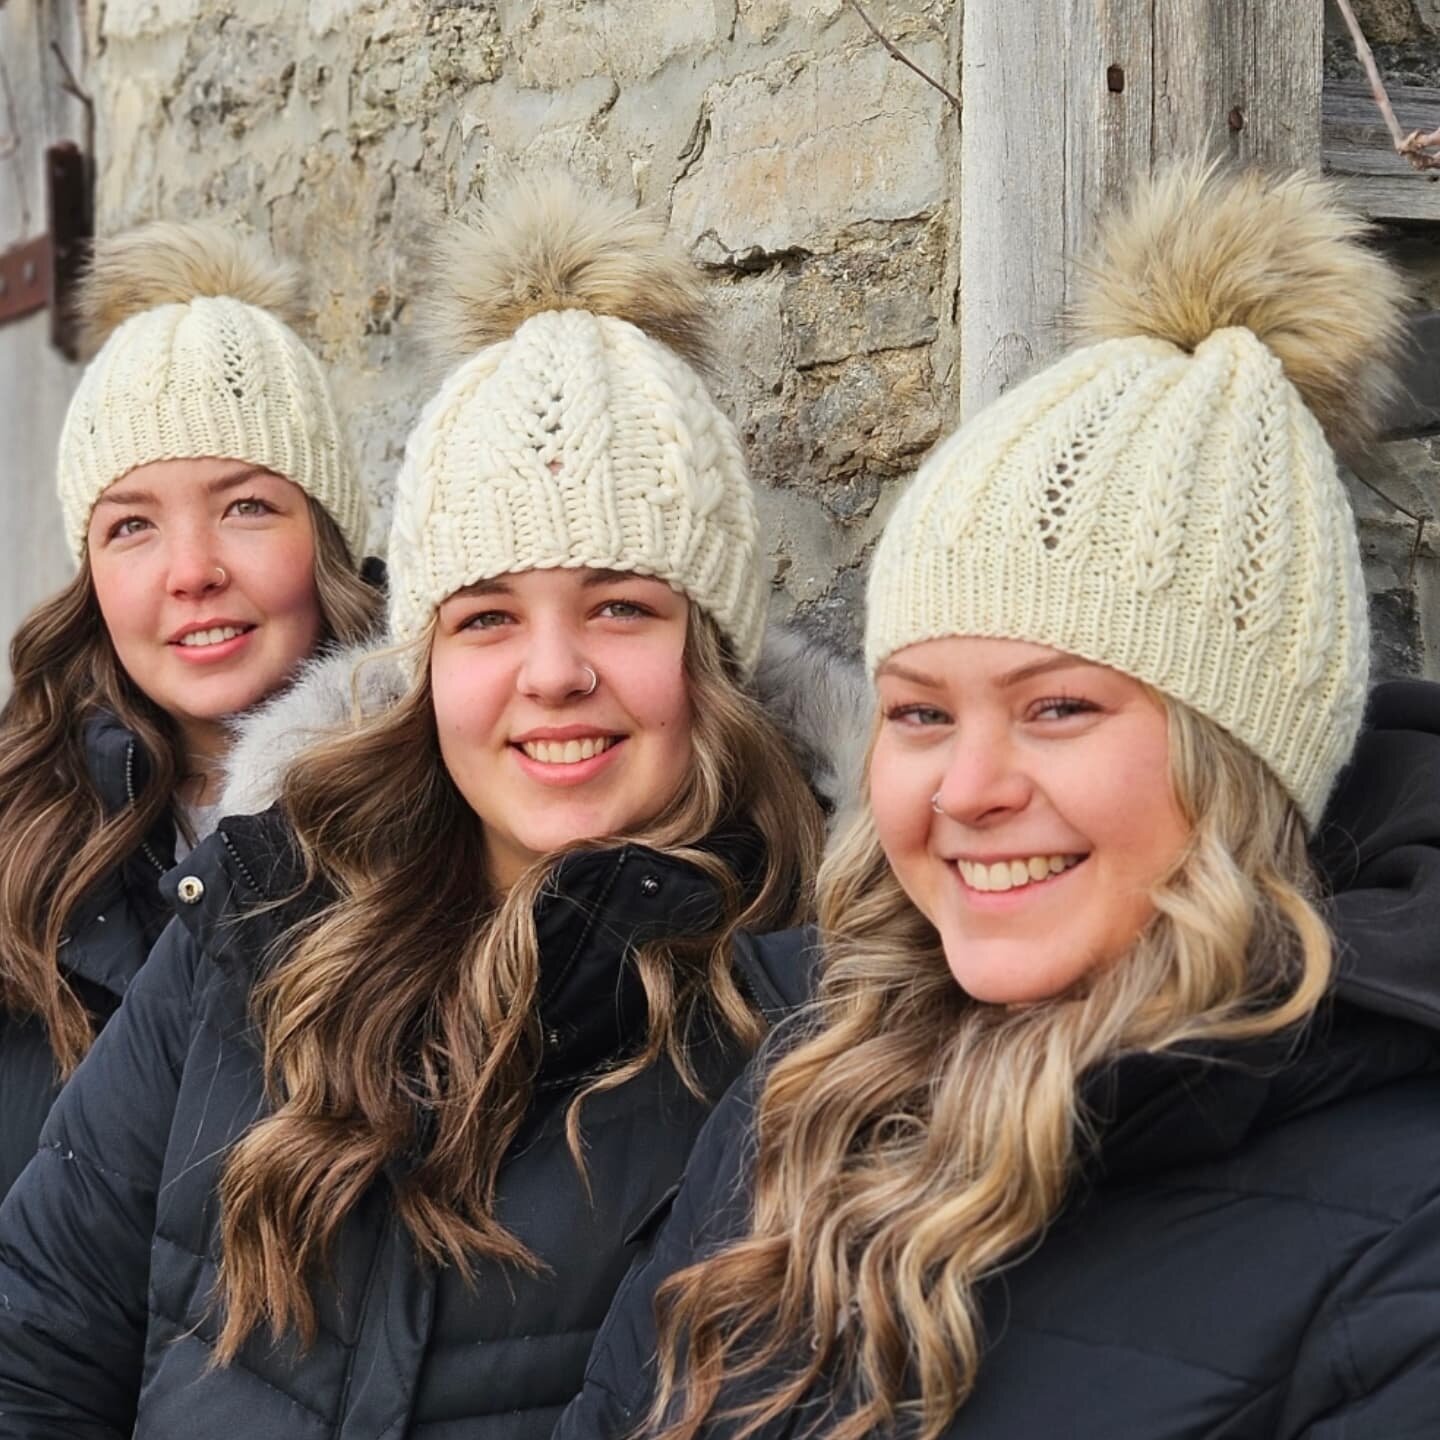 The new Hearts and Lace Beanie designed by @keraknits is such a beautiful pattern to knit and wear that we couldn't stop at just one. 

From left to right, the beanies pictured have been knit using Malabrigo Mecha (light bulky), Rasta (super bulky), 